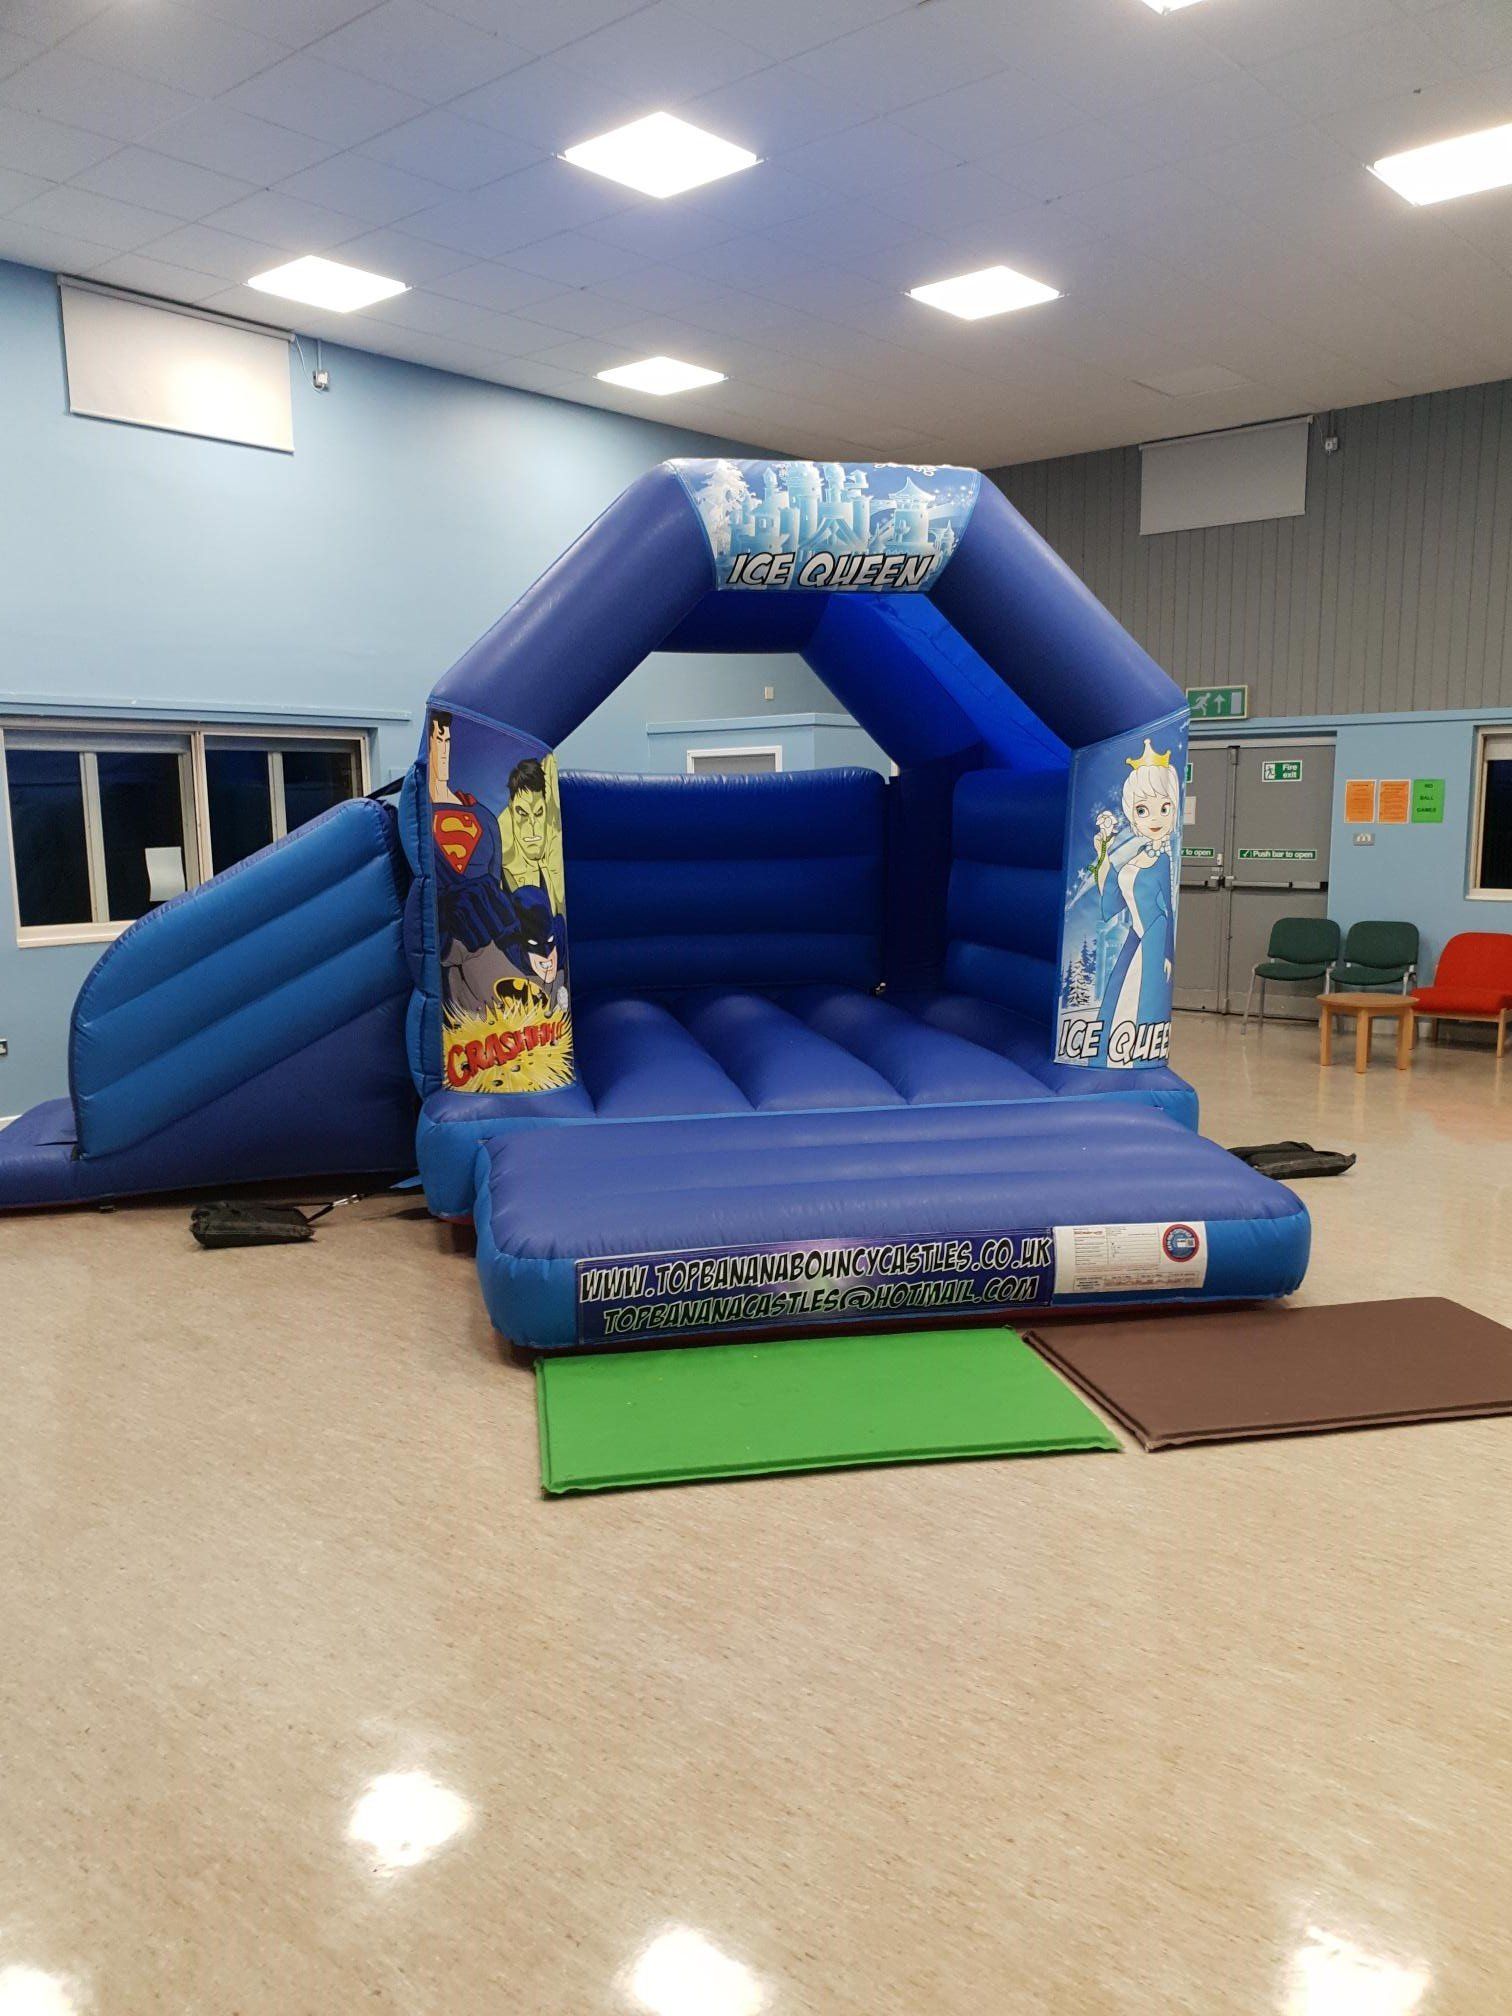 snow queen theme slide combo bouncy castle in a hall